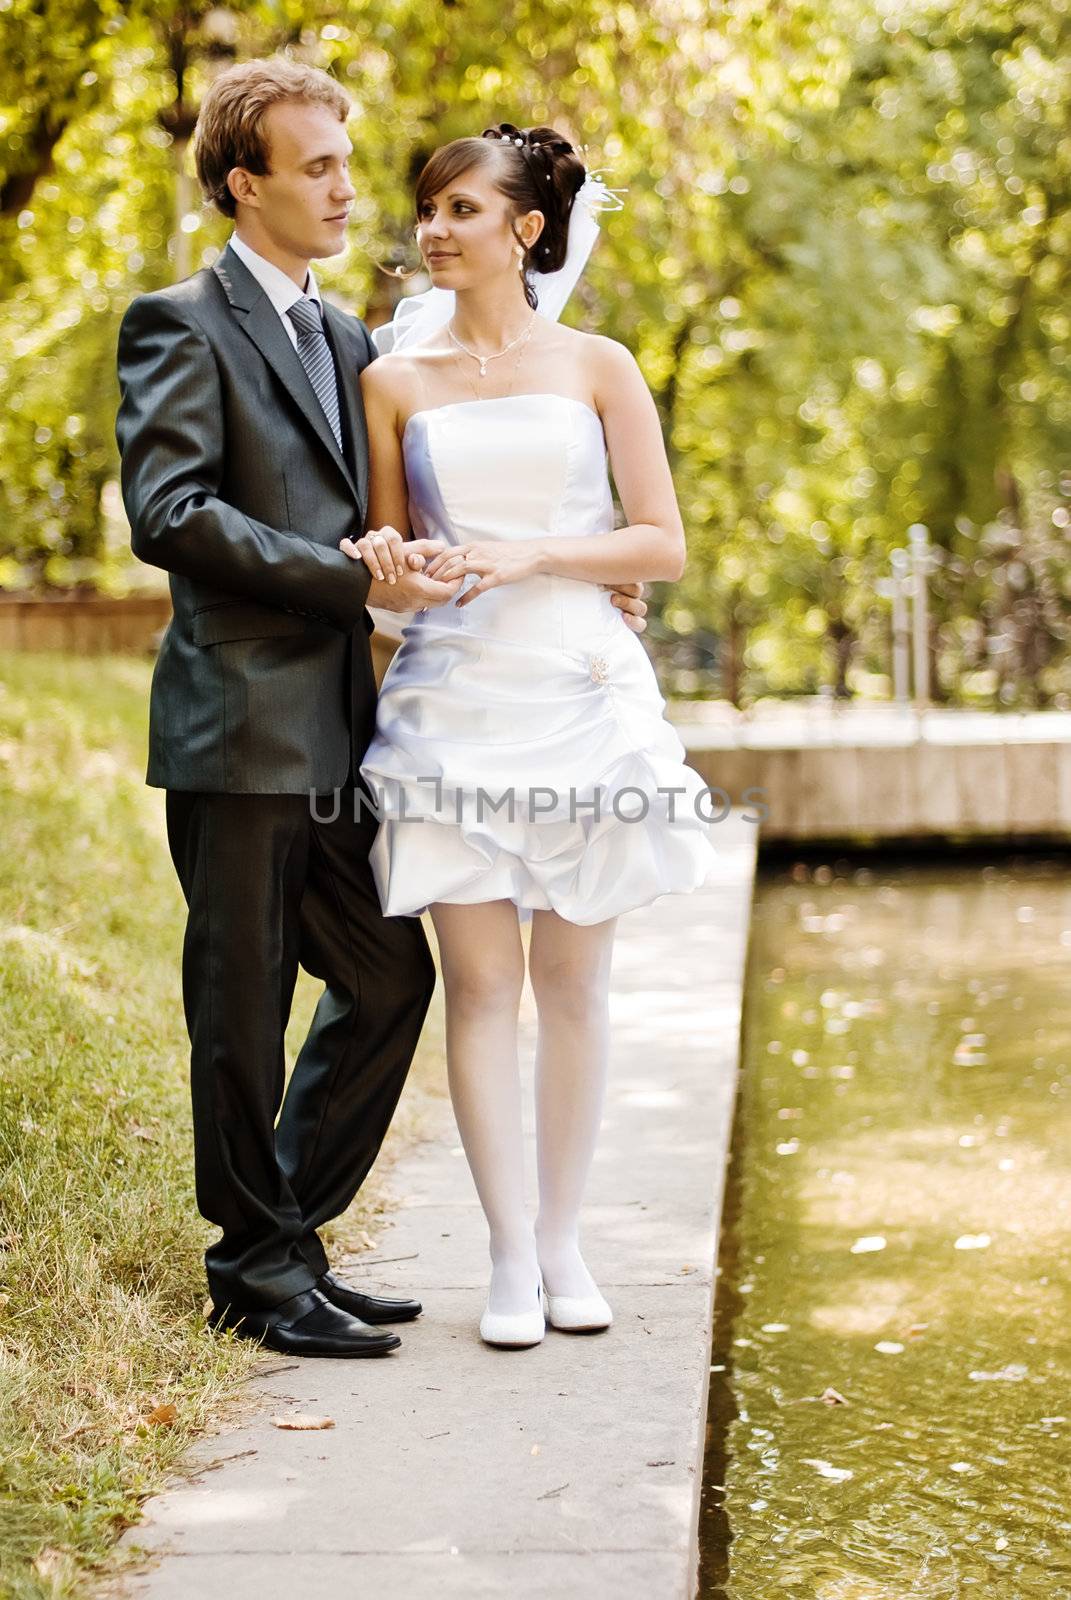 The bride and groom, standing near the lake in the park on a beautiful sunny day